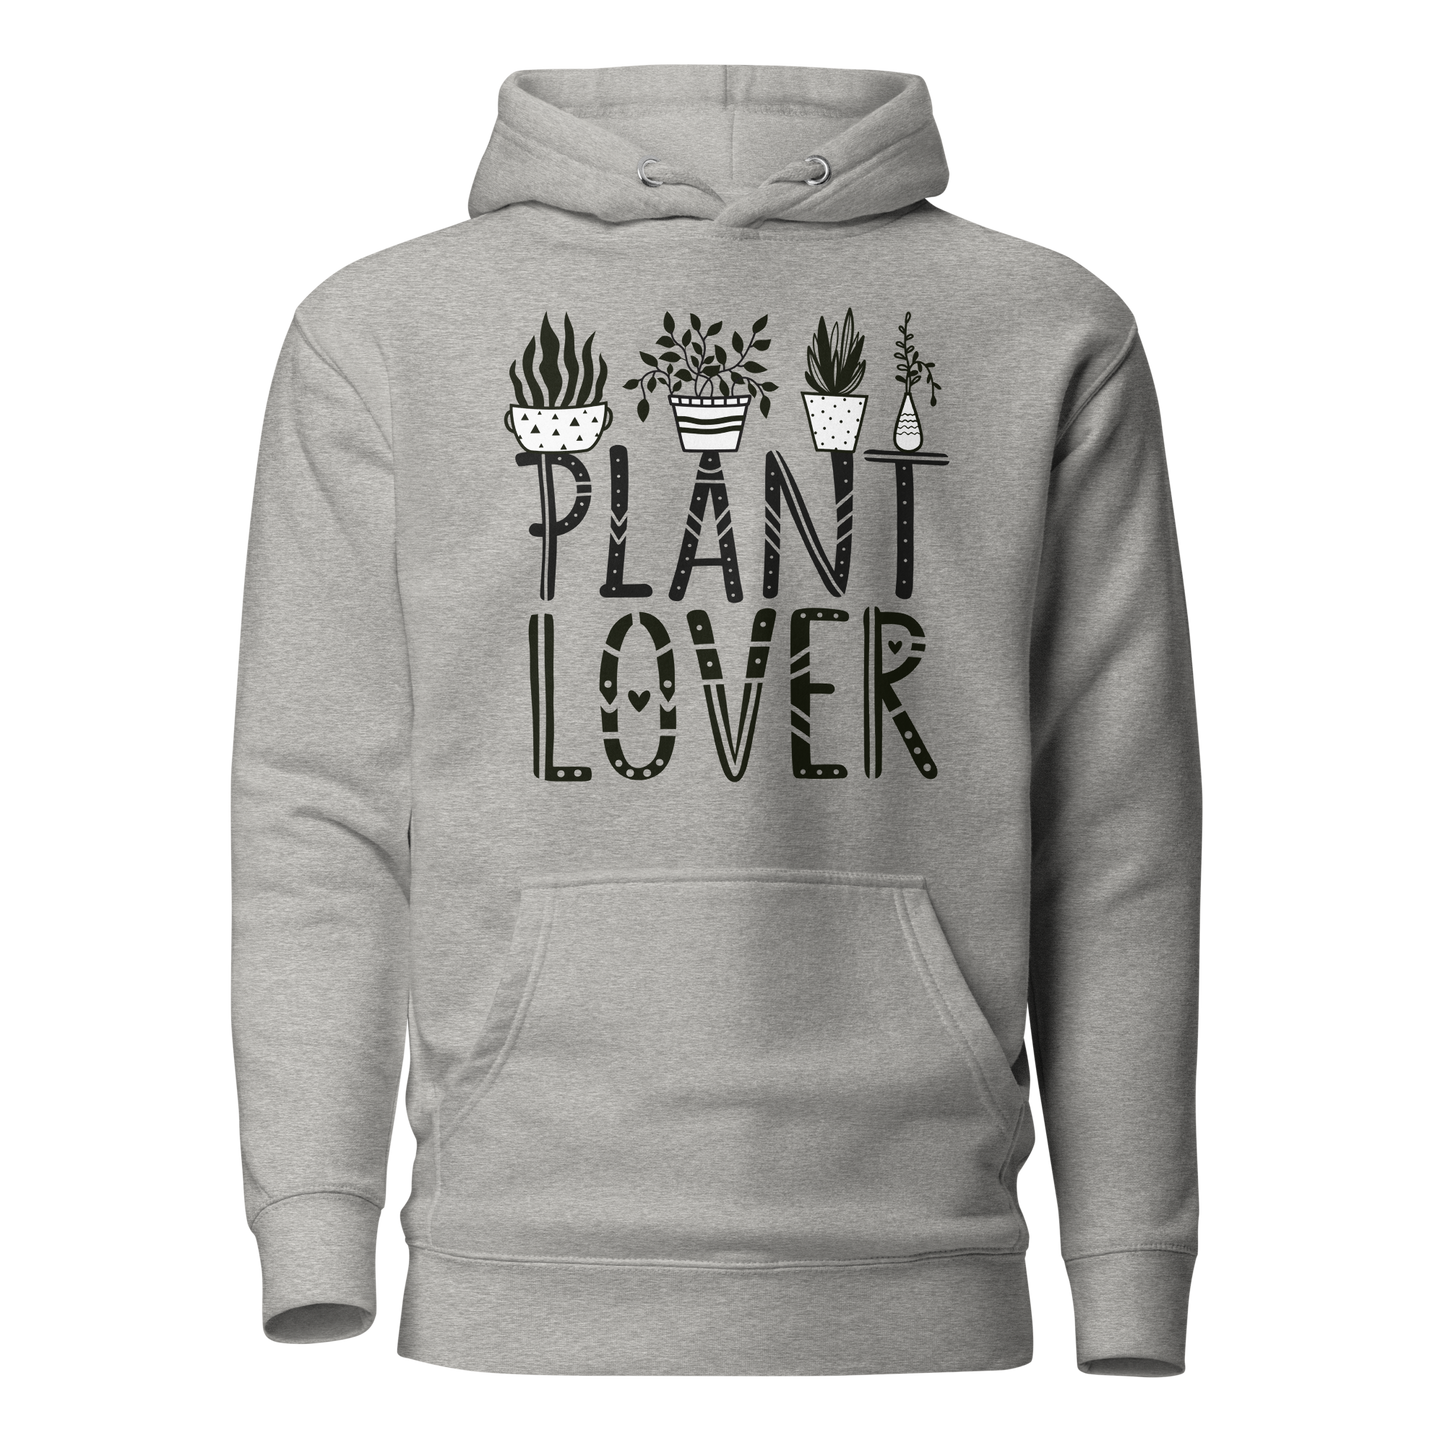 PLANT LOVER